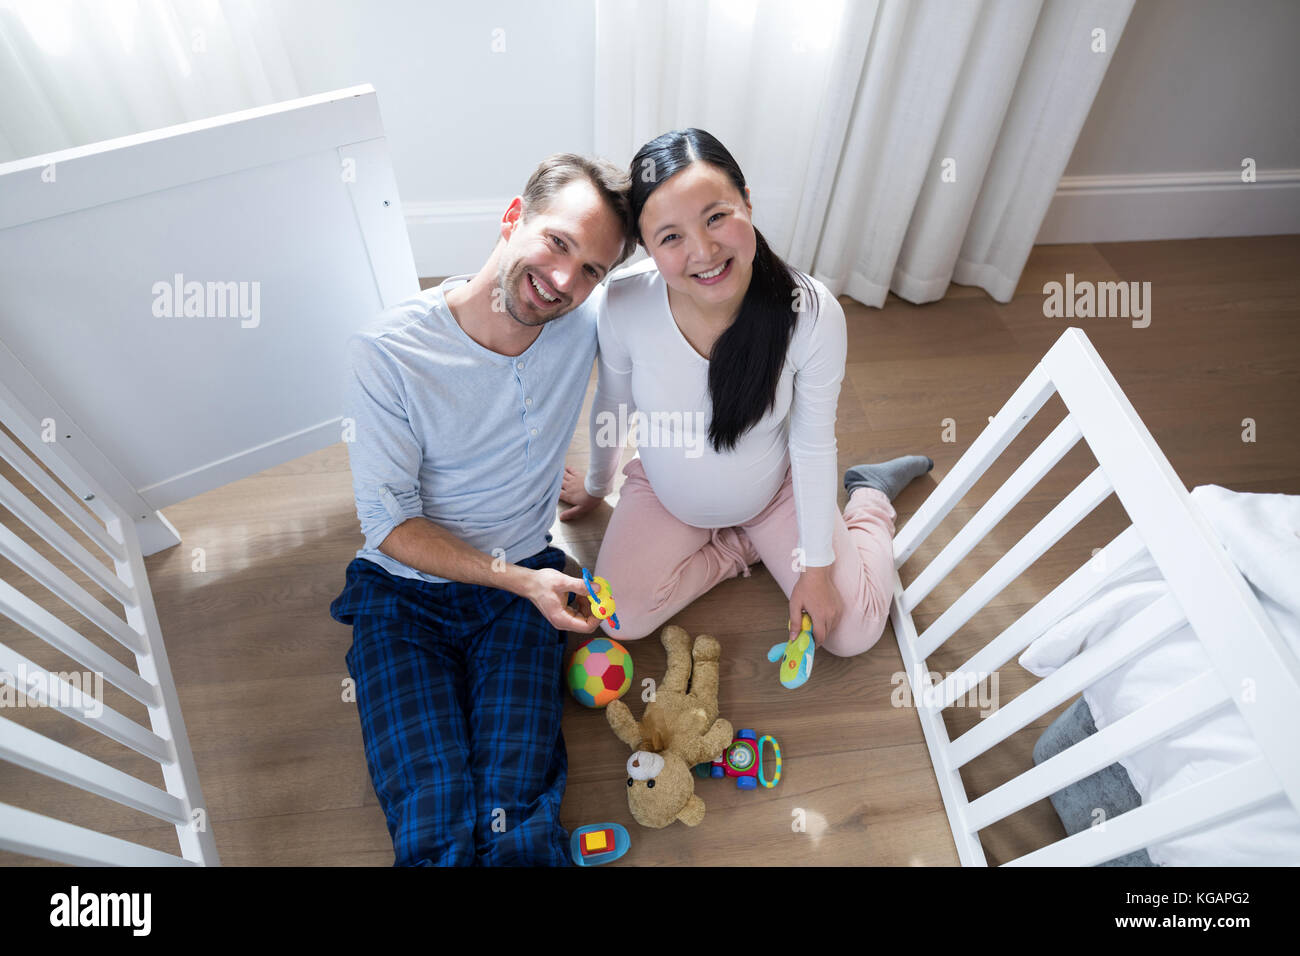 Overhead of happy couple playing with toys in bedroom Stock Photo